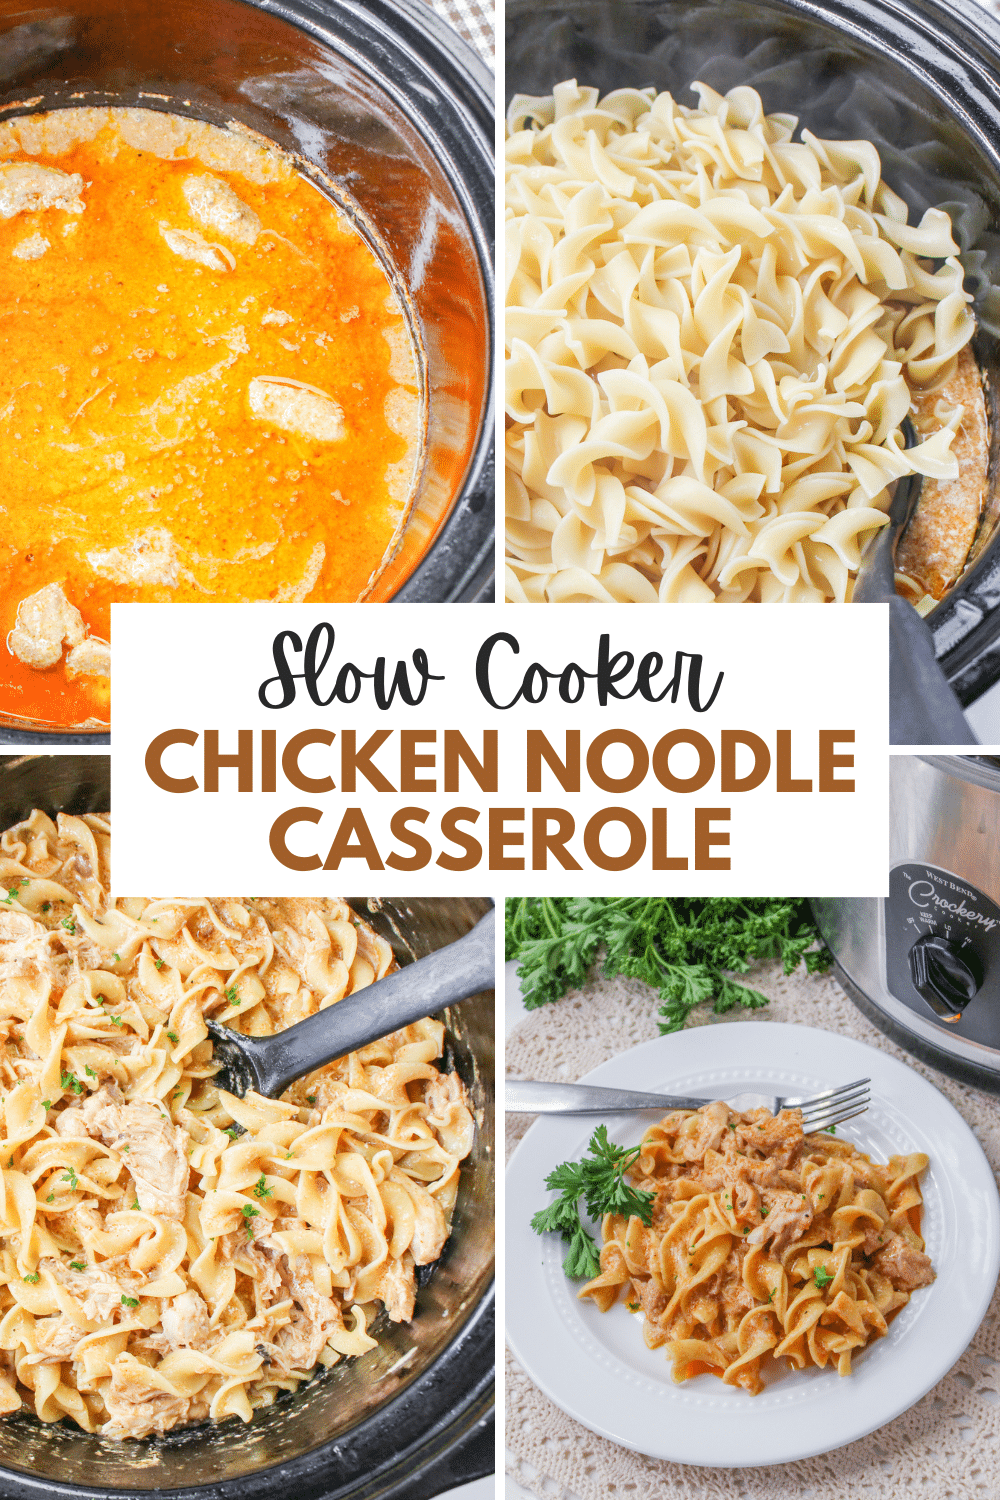 Chicken noodle casserole made in a slow cooker.